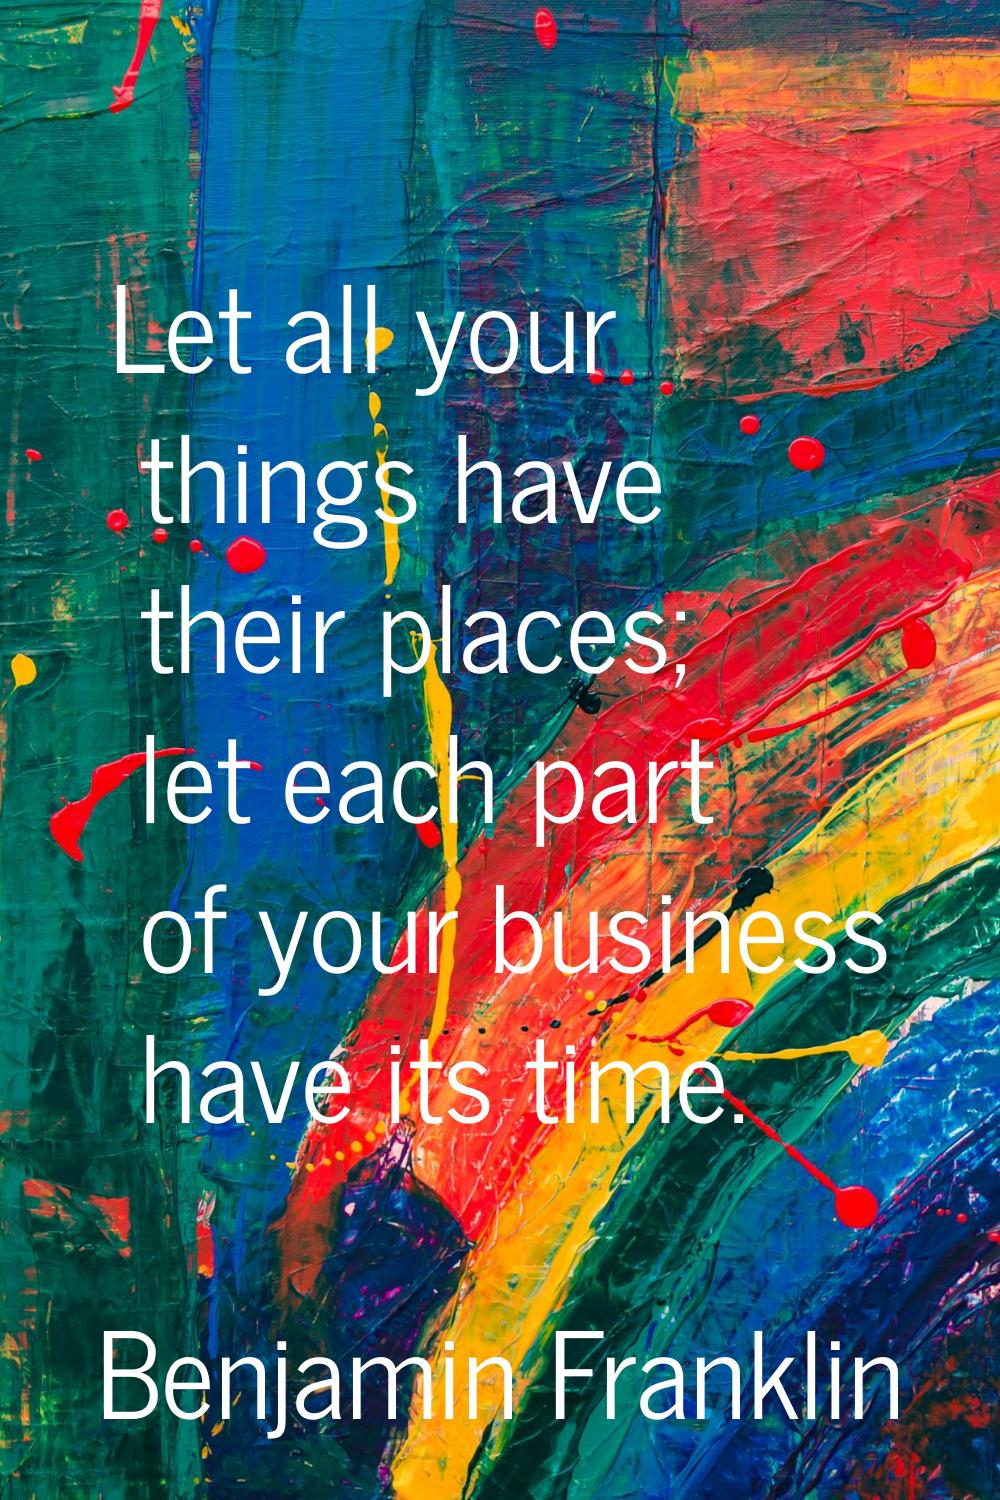 Let all your things have their places; let each part of your business have its time.